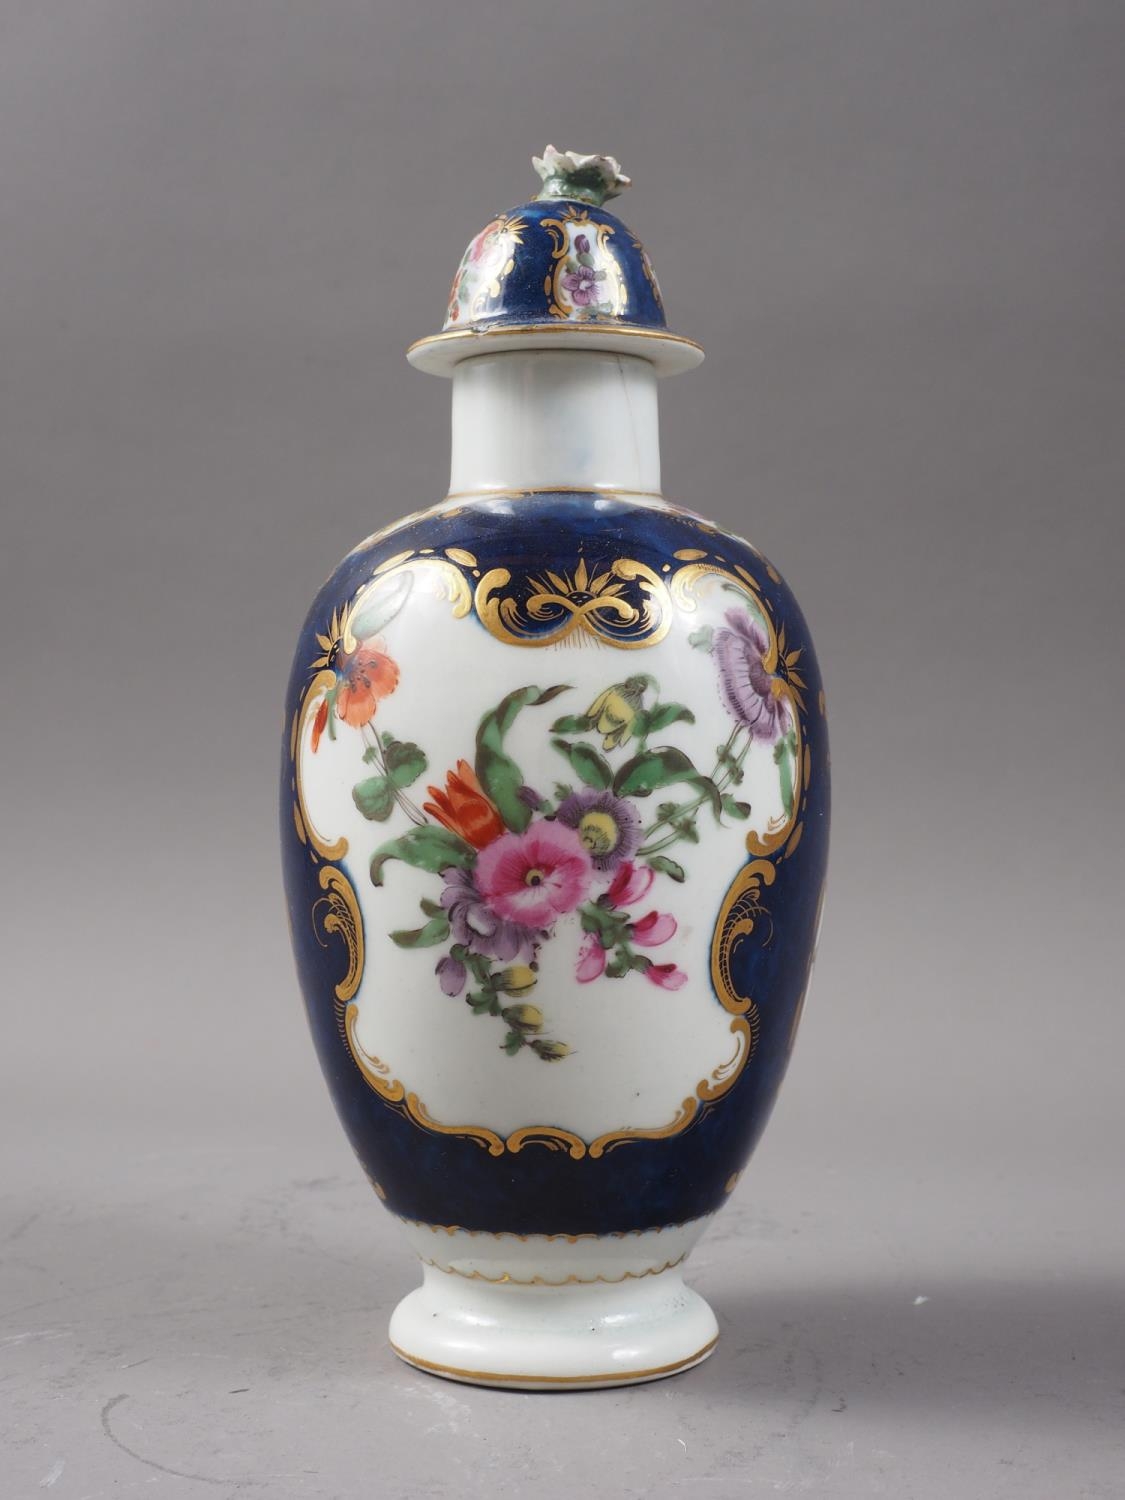 An 18th century Worcester oviform tea caddy with reserved floral panels on a blue scale ground